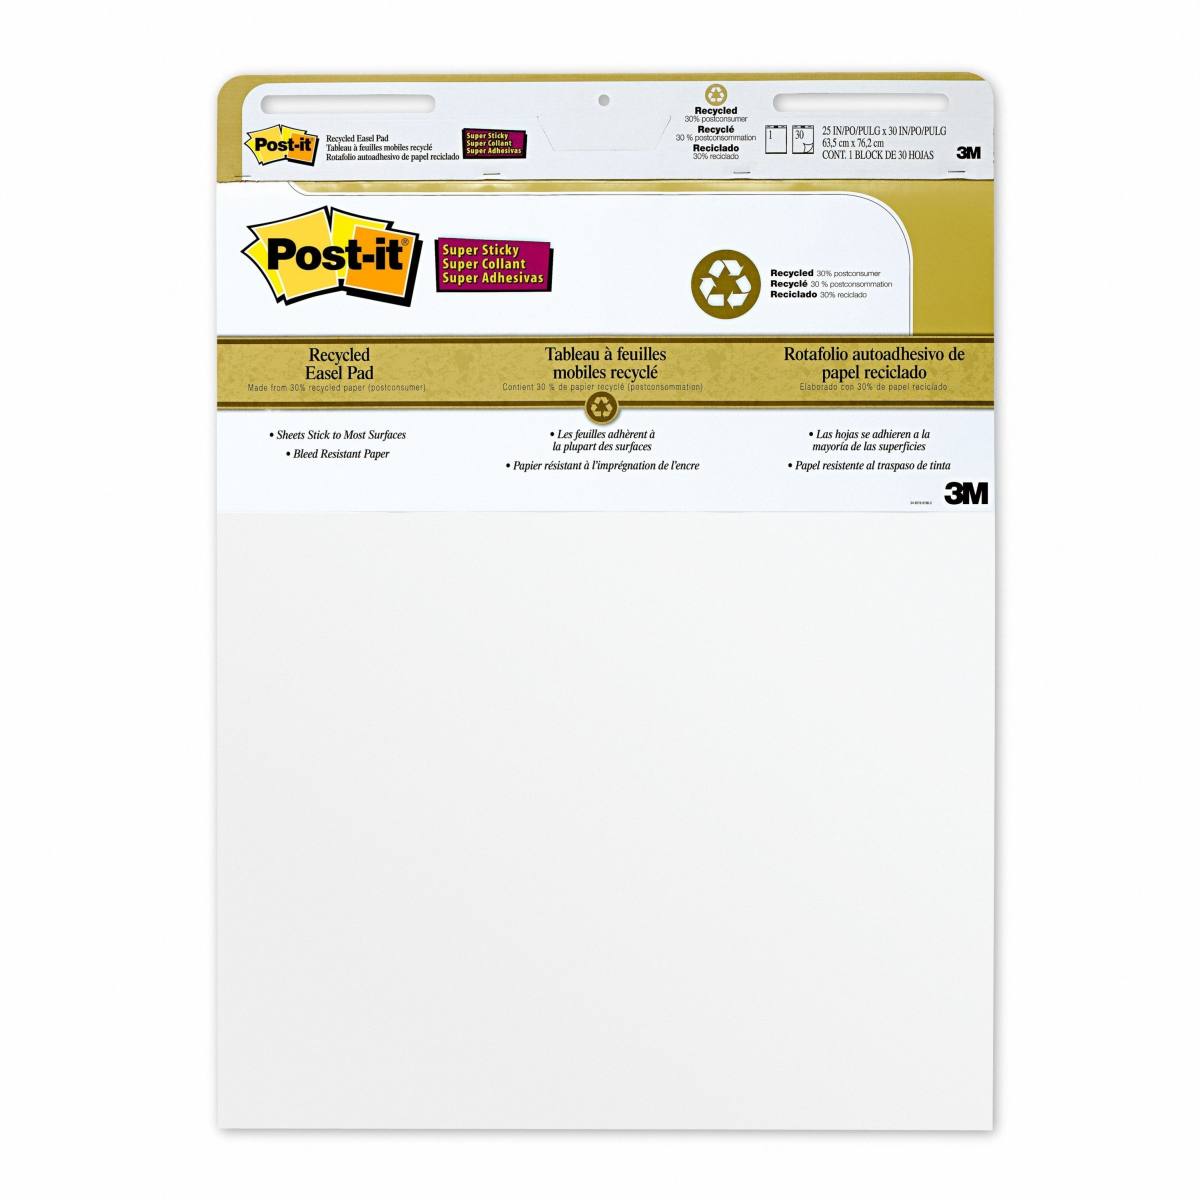 3M Post-it Super Sticky Meeting Chart Recycling, unlined, white, 2 pads, 635 mm x 762 mm